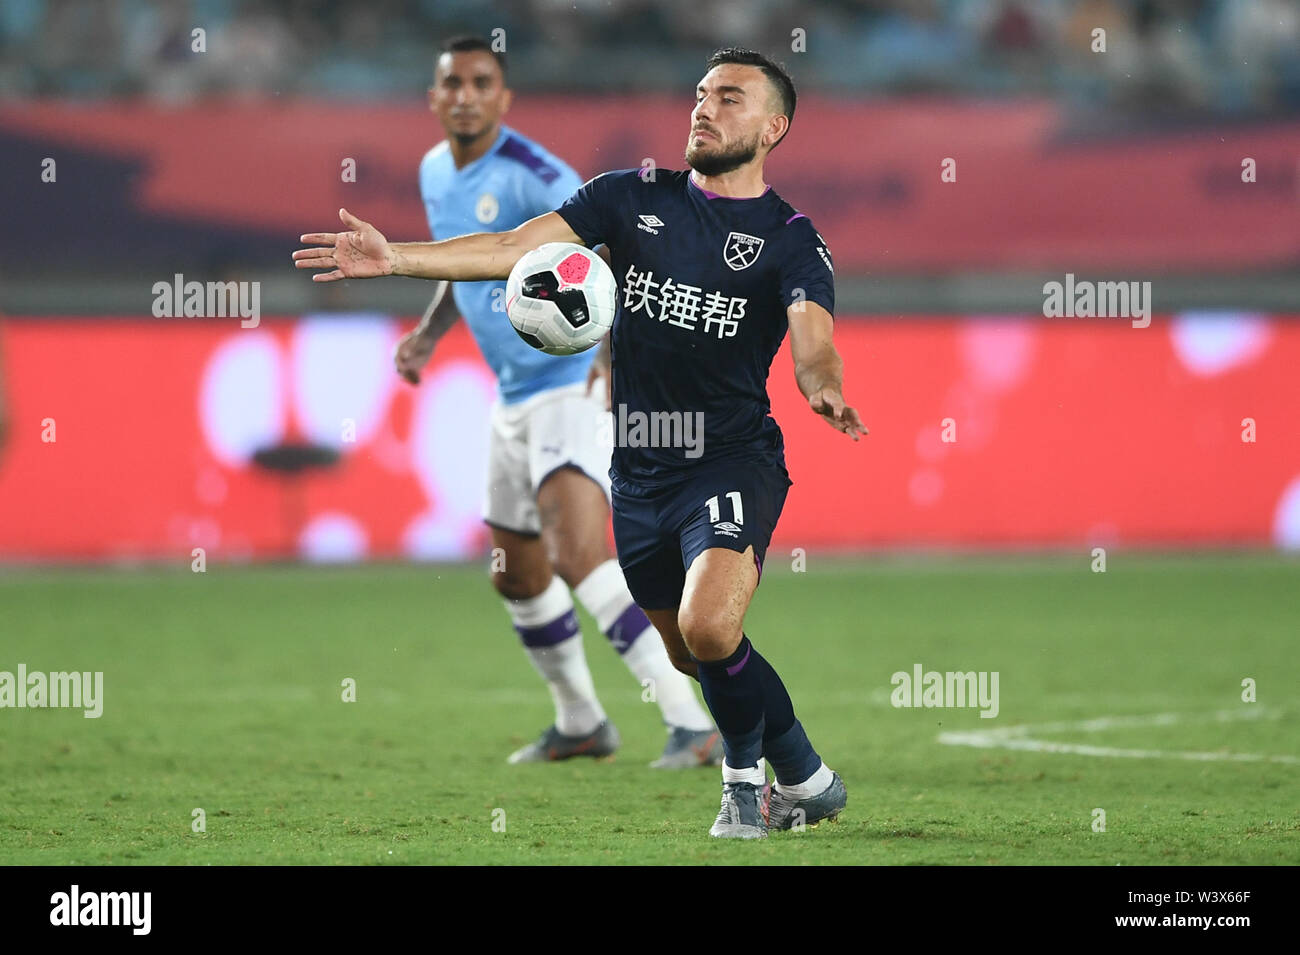 Scottish football player Robert Snodgrass of West Ham United F.C. of English League champions dribbles against Manchester City F.C. in the semifinal match of the Premier League Asia Trophy 2019 in Nanjing city, east China's Jiangsu province, 17 July 2019. Manchester City F.C. defeated West Ham United F.C. 4-1. Stock Photo